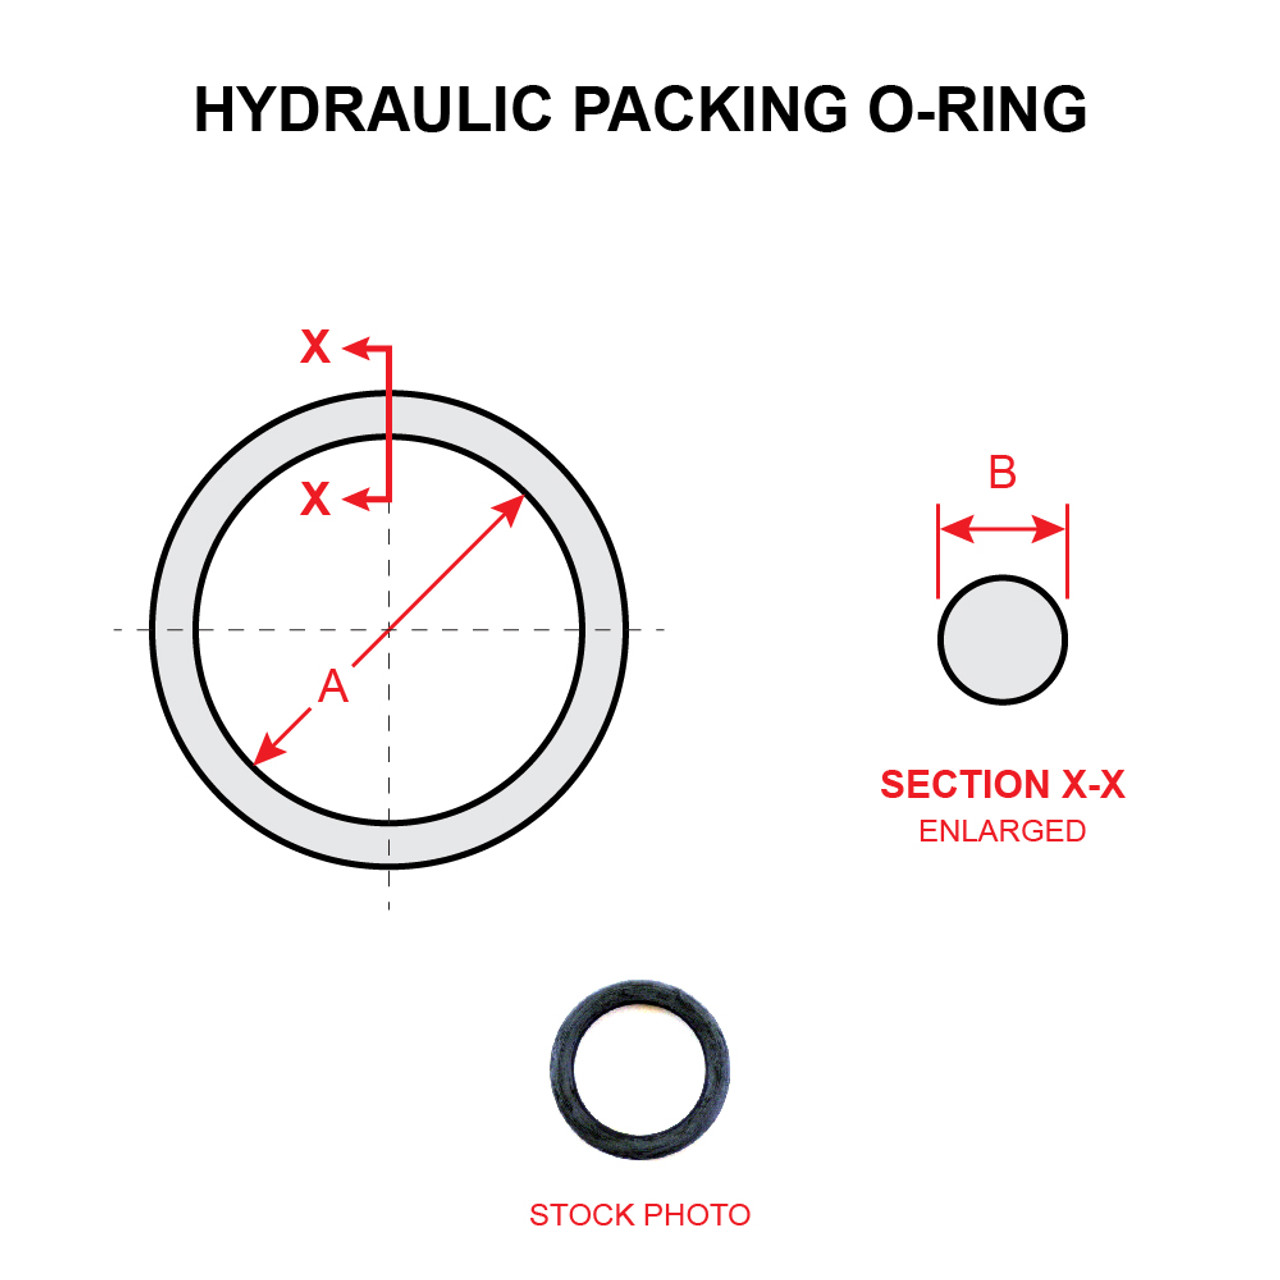 MS28775-239   HYDRAULIC PACKING O-RING